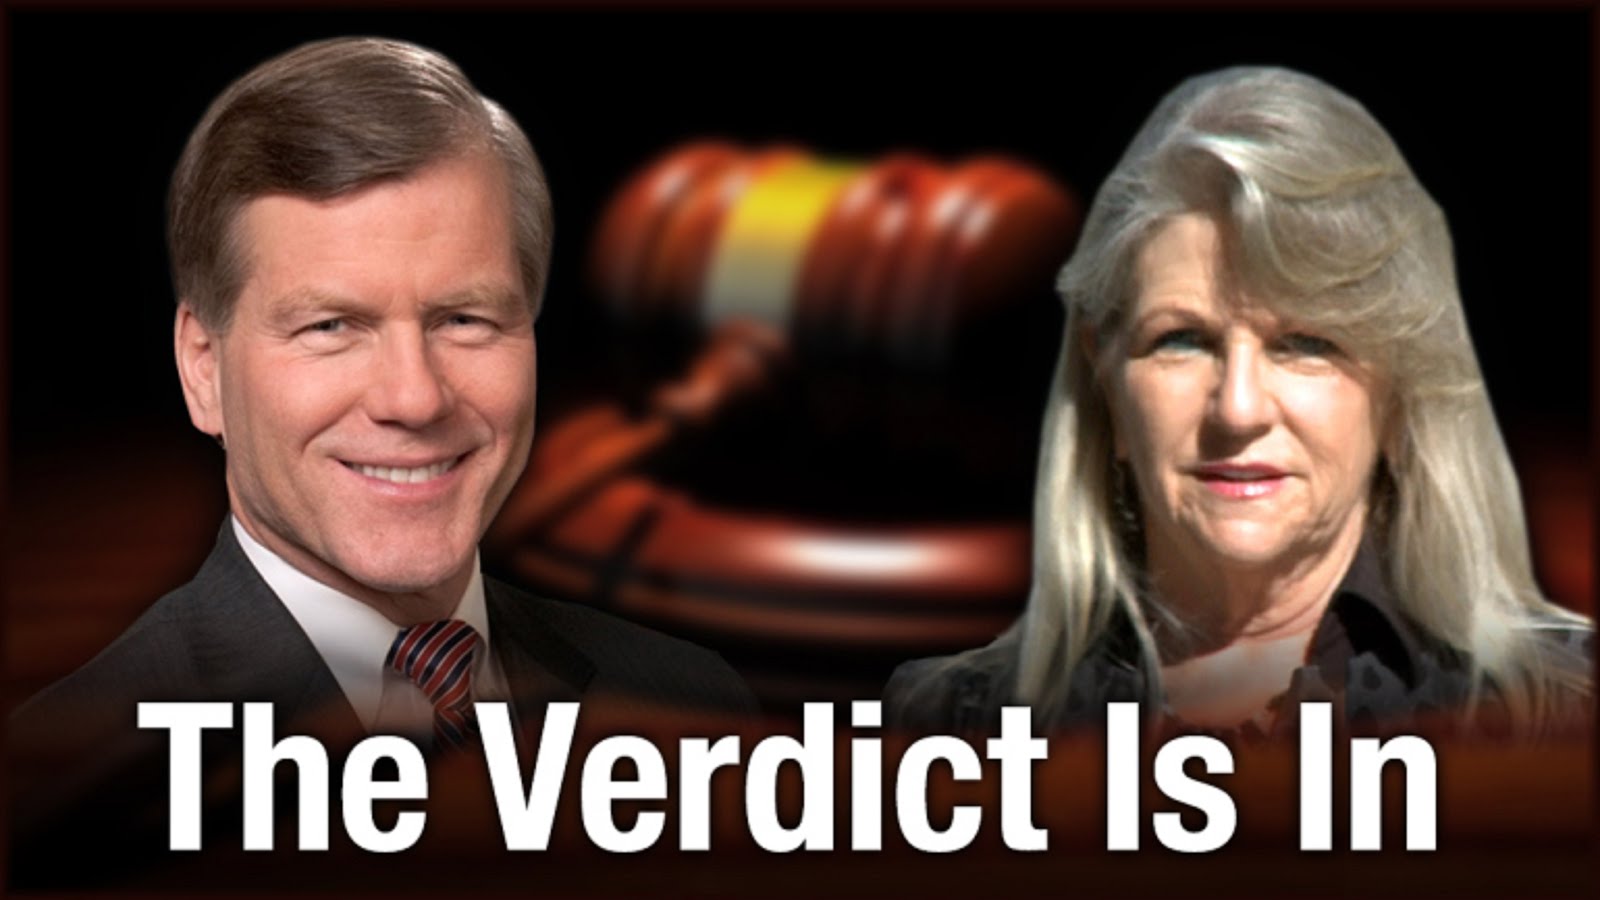 THE VERDICT IS IN:  THE CHURCH IS FOUND GUILTY:AND IS THE GREAT WHORE BABYLON THAT GOES TO HELL